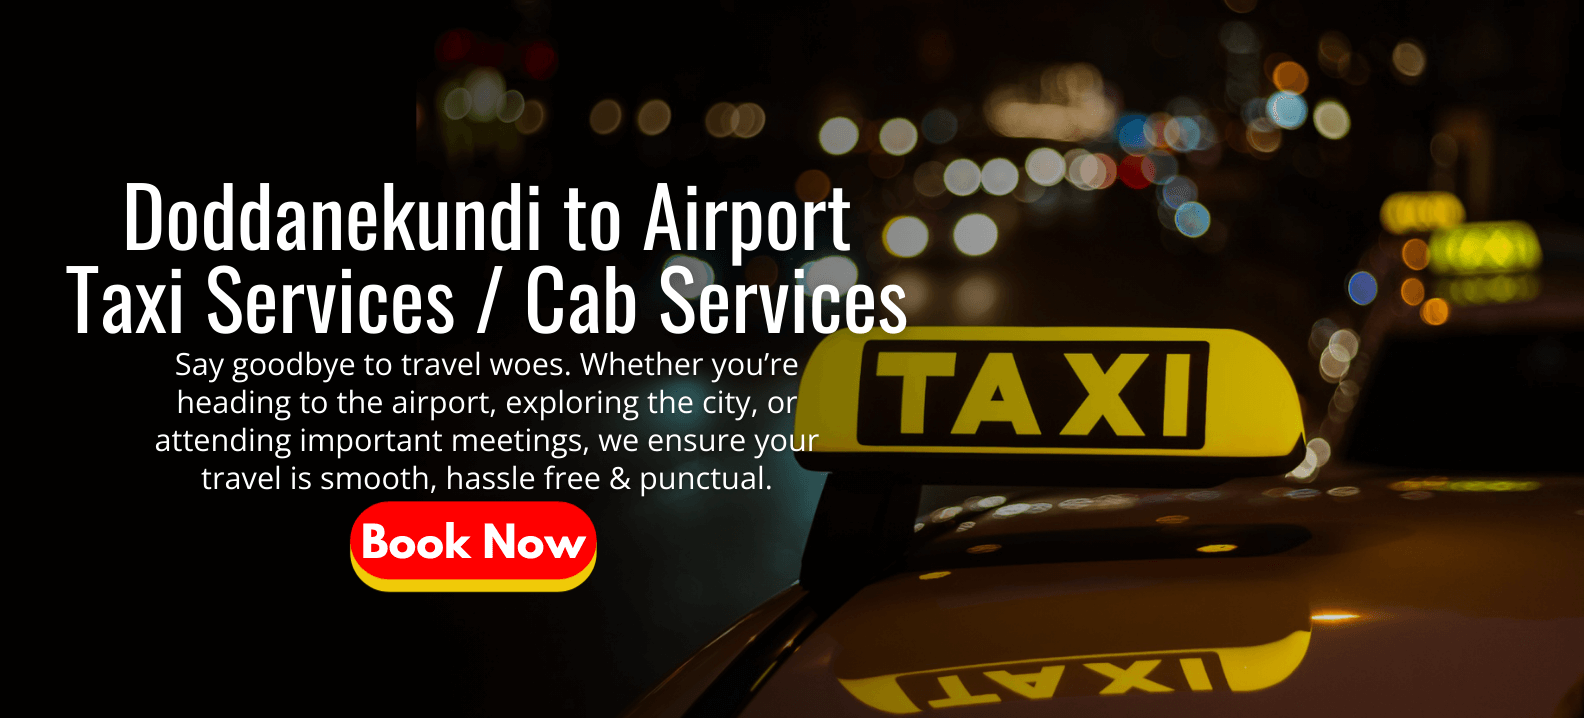 Doddanekundi to Airport Taxi Services _ Cab Services